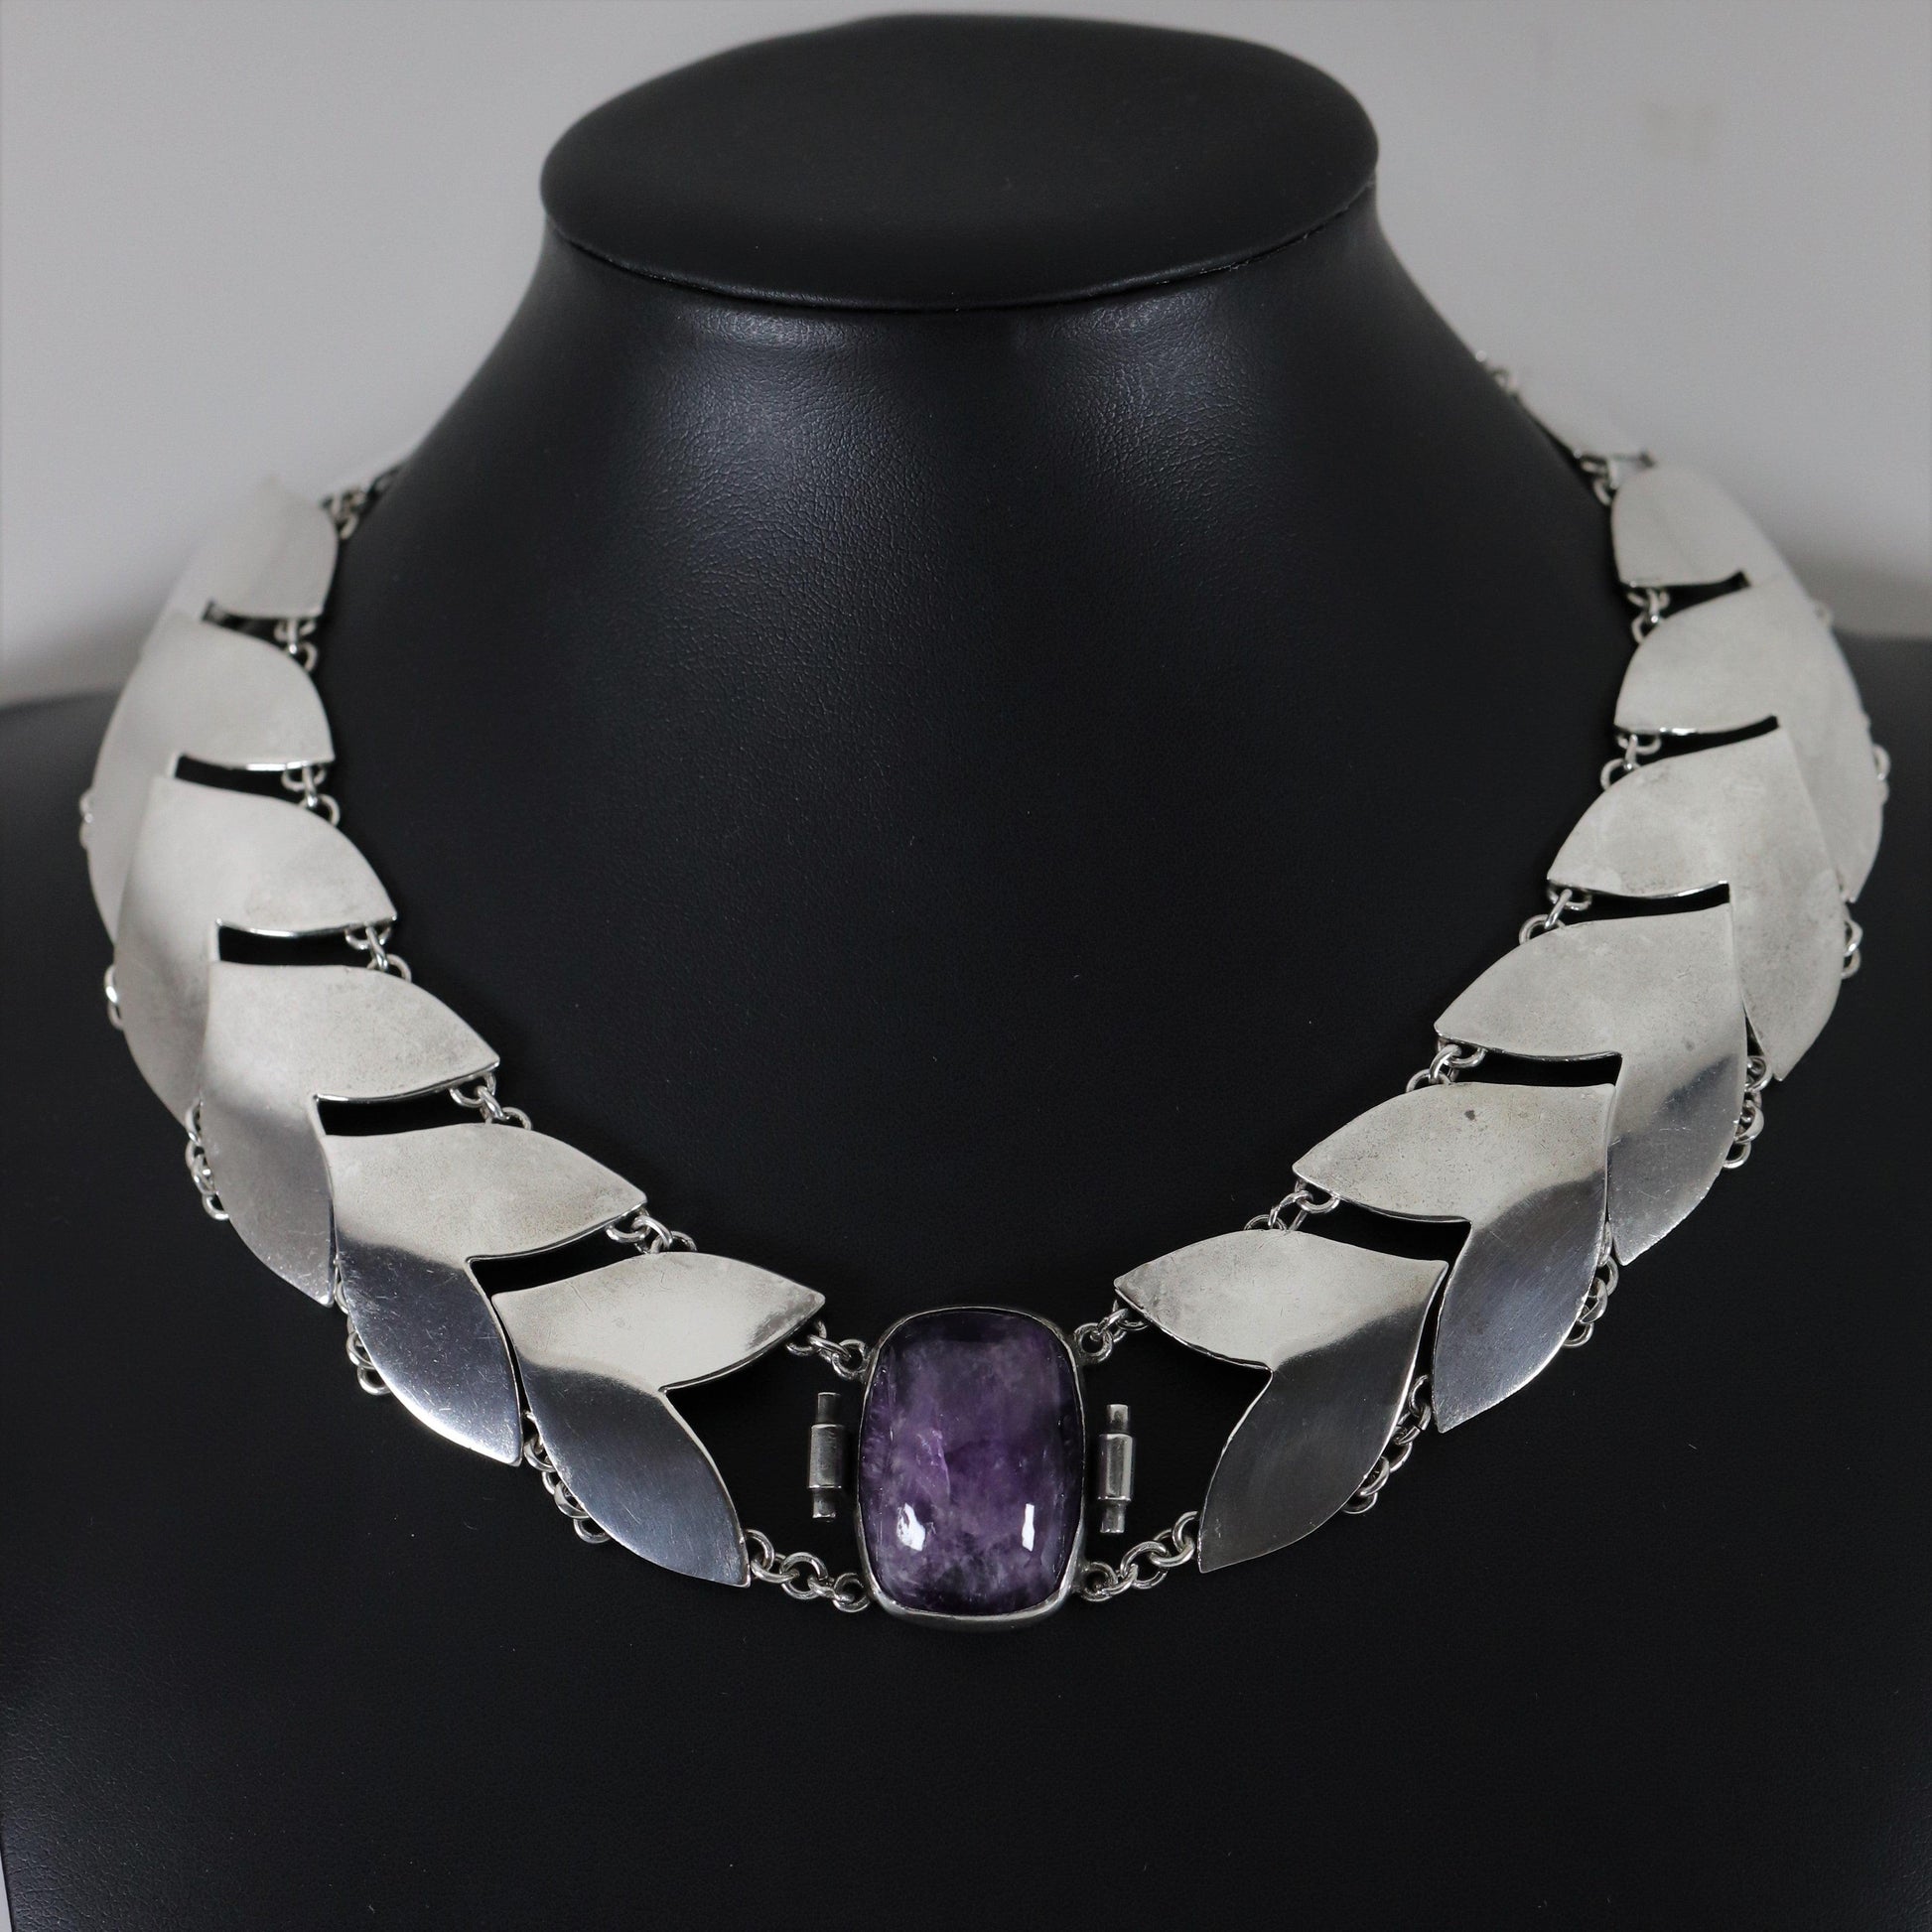 Vintage Fred Davis Taxco Silver Mexican Jewelry | Handcrafted Link Amethyst Necklace - Carmel Fine Silver Jewelry